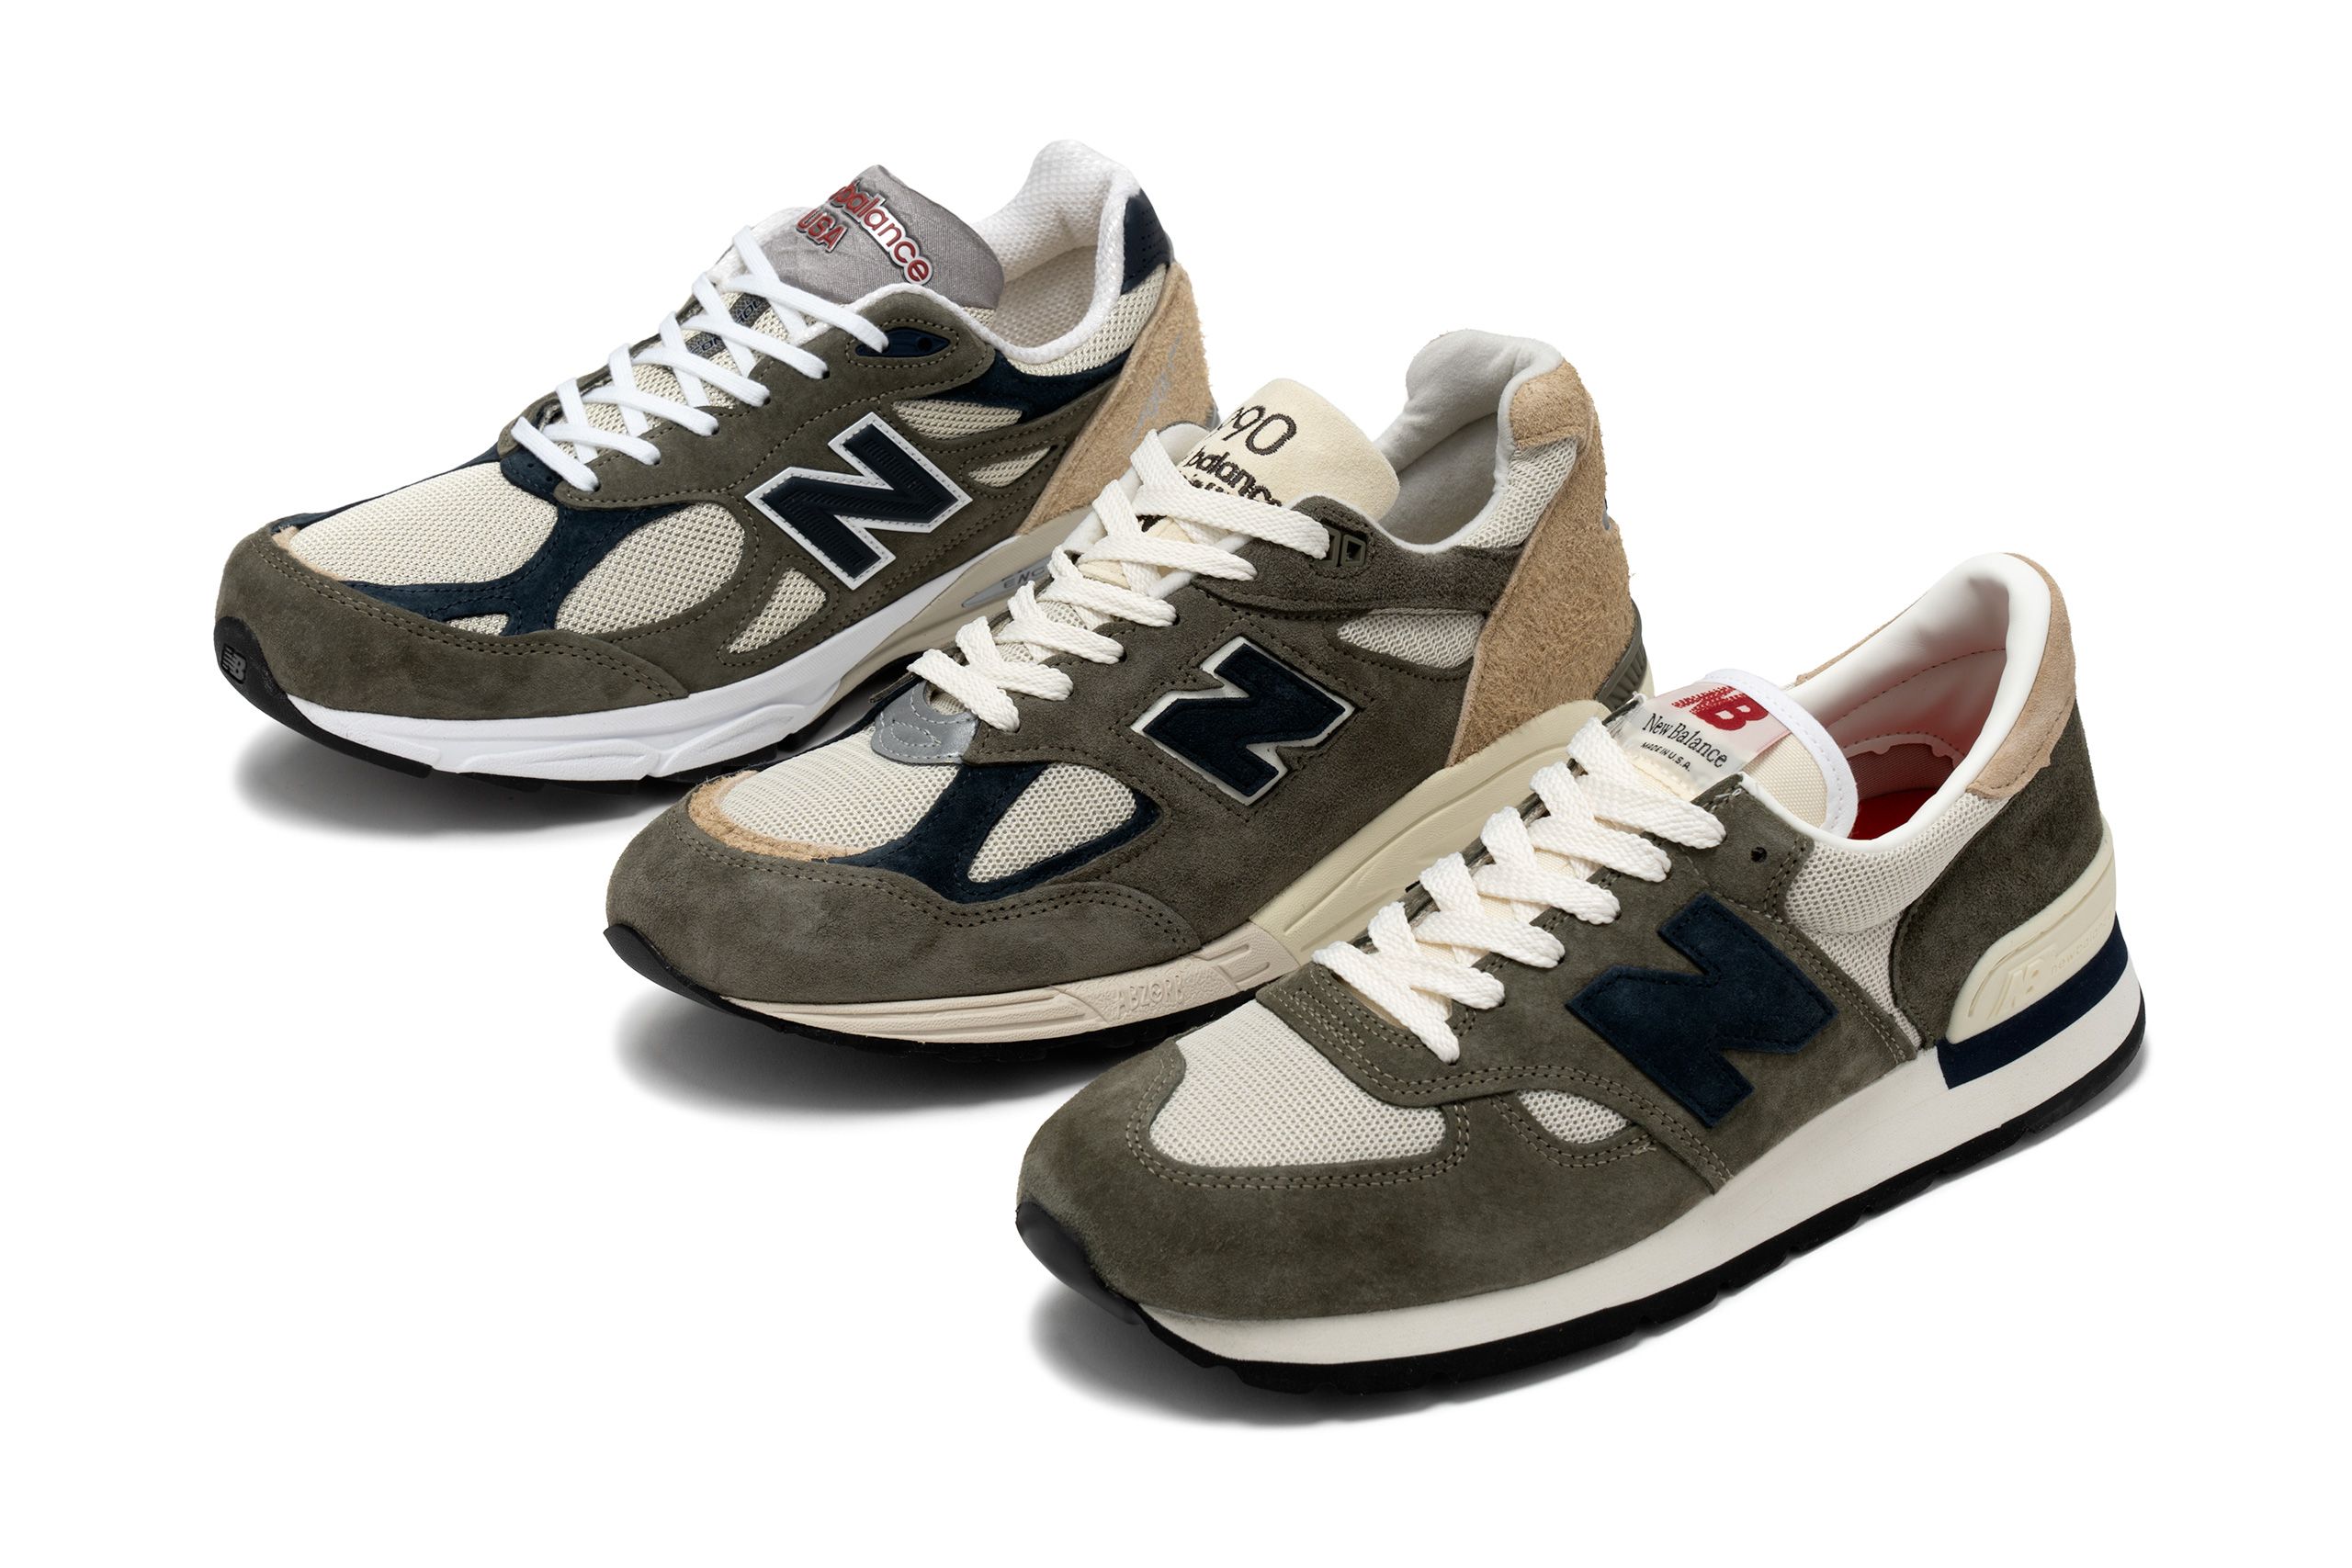 New Balance x Teddy Santis Made in USA 990 Collection | Release